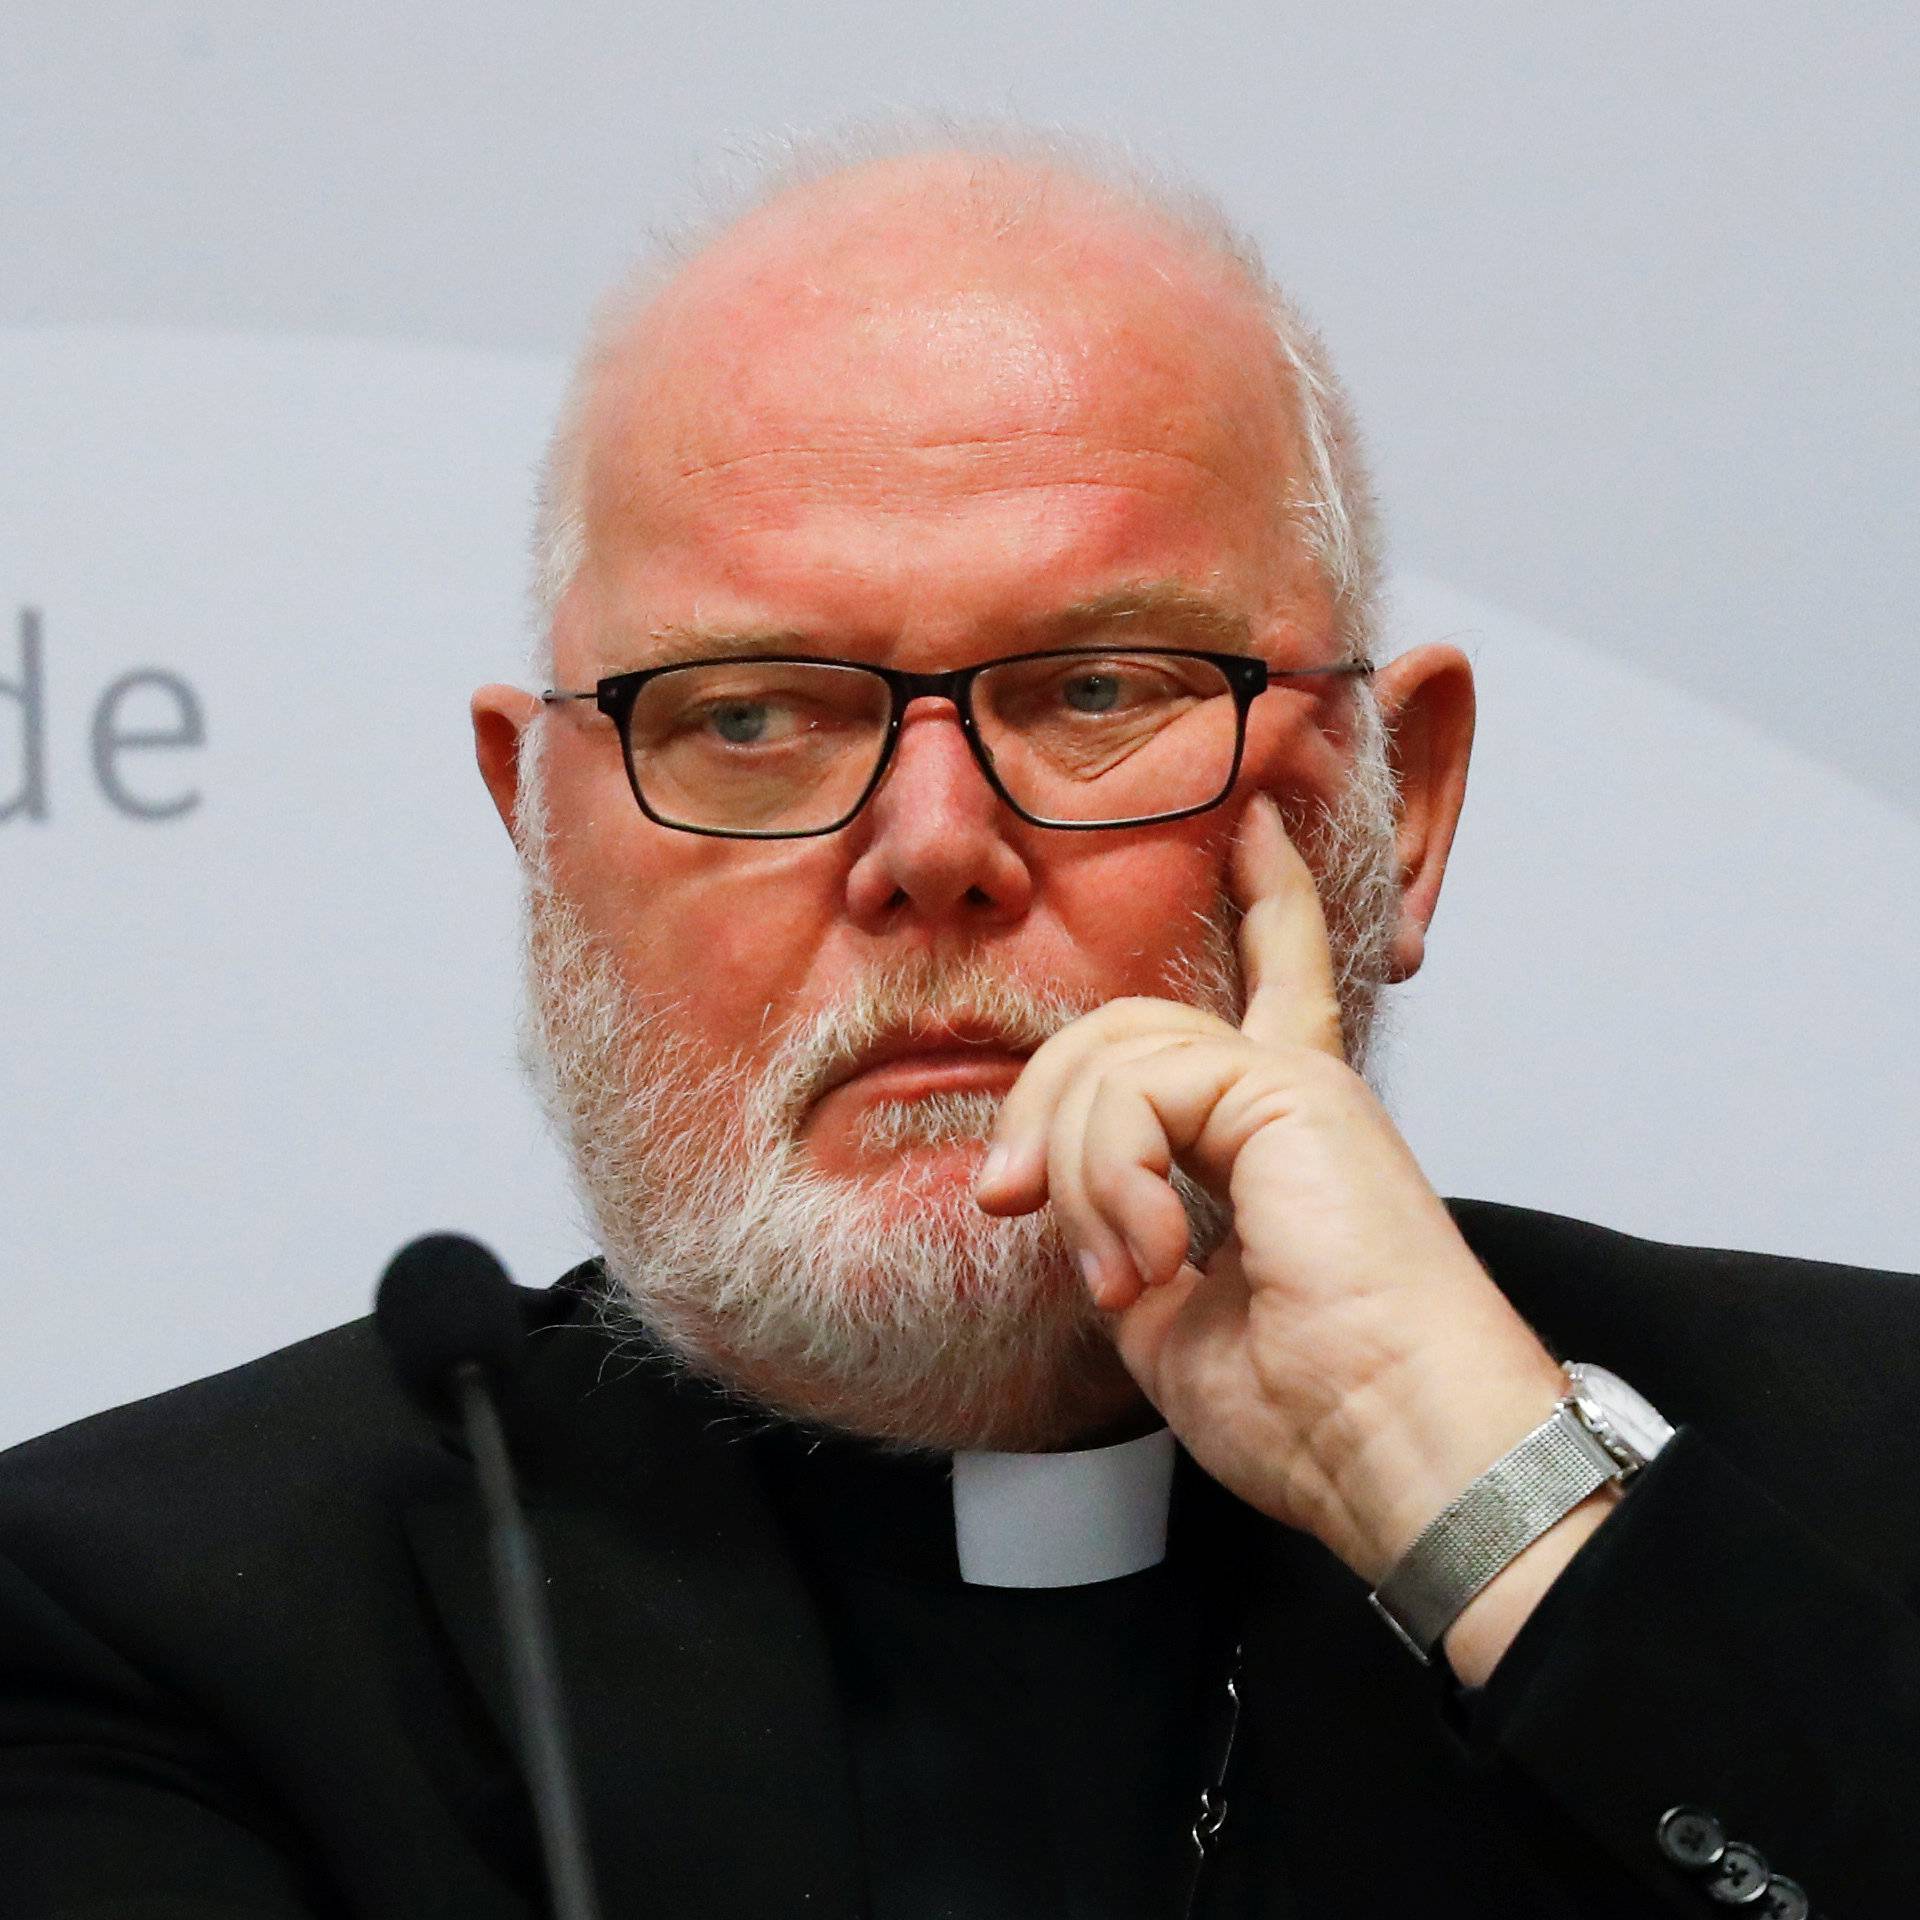 Cardinal Reinhard Marx, chairman of German Bishops's Conference attends a press conference in Fulda